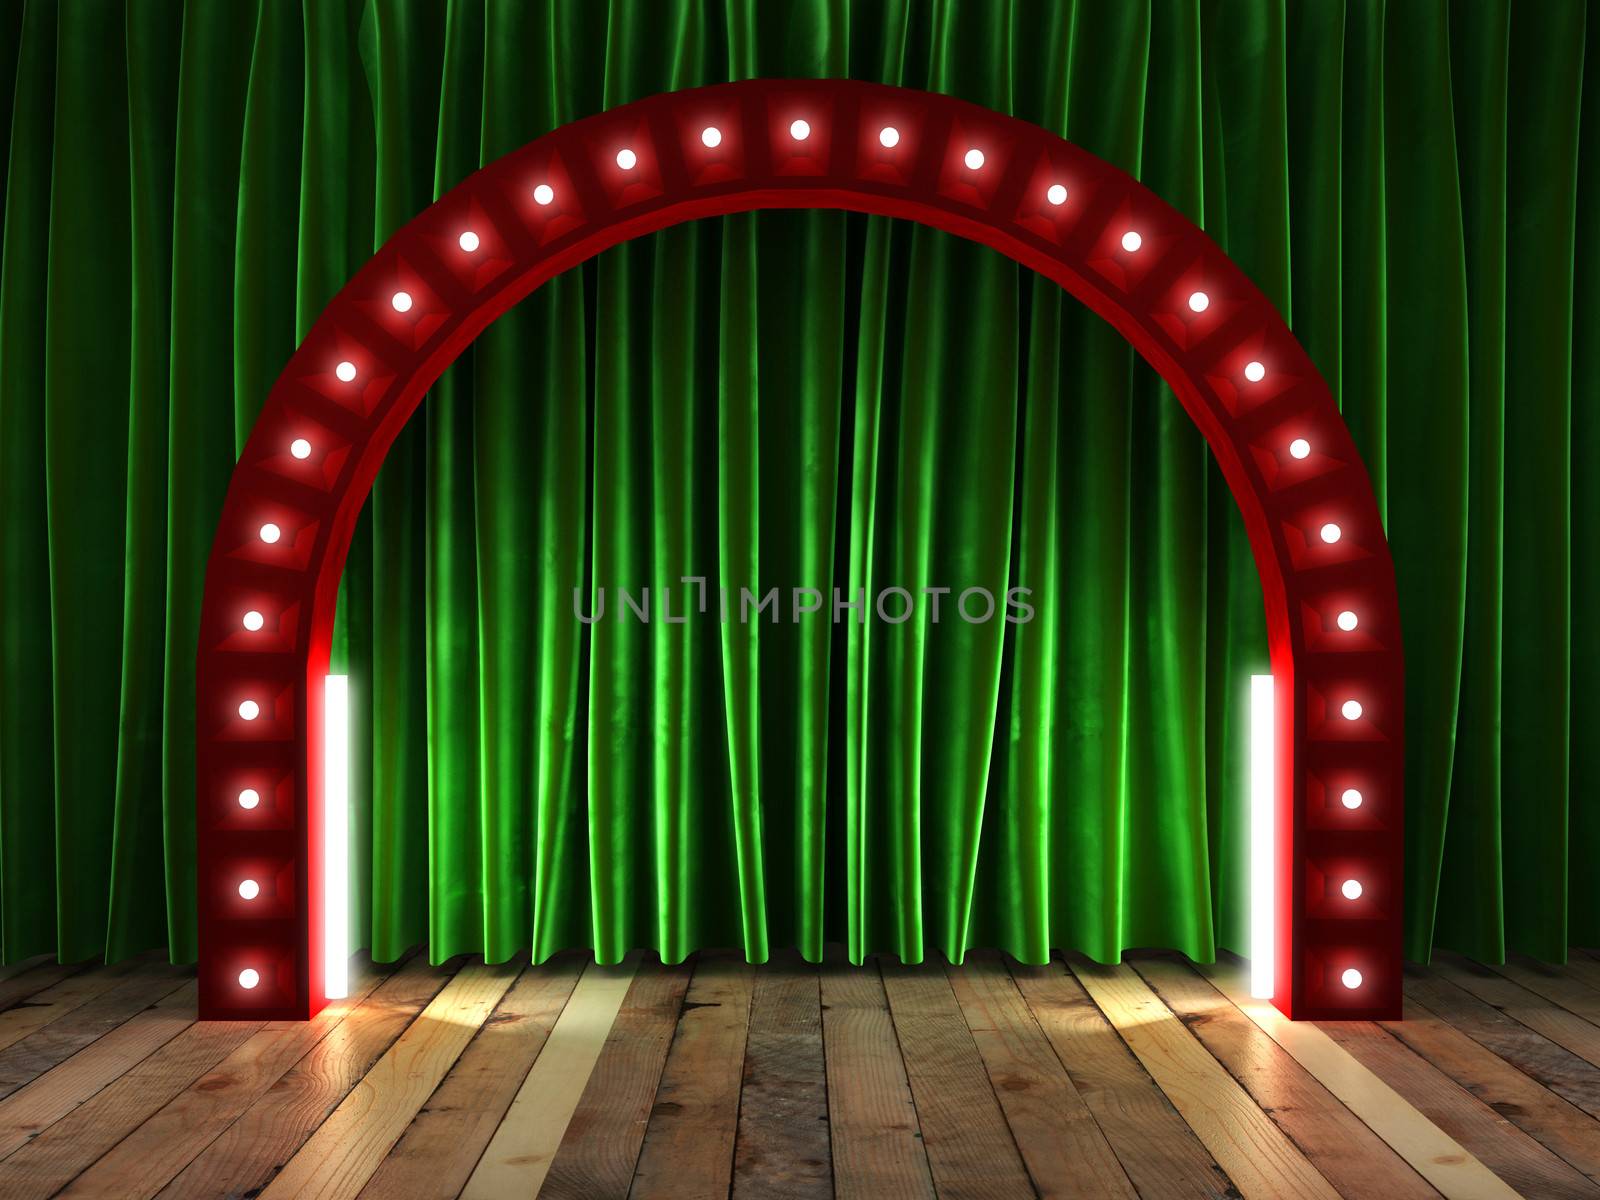 green fabrick curtain on stage by videodoctor